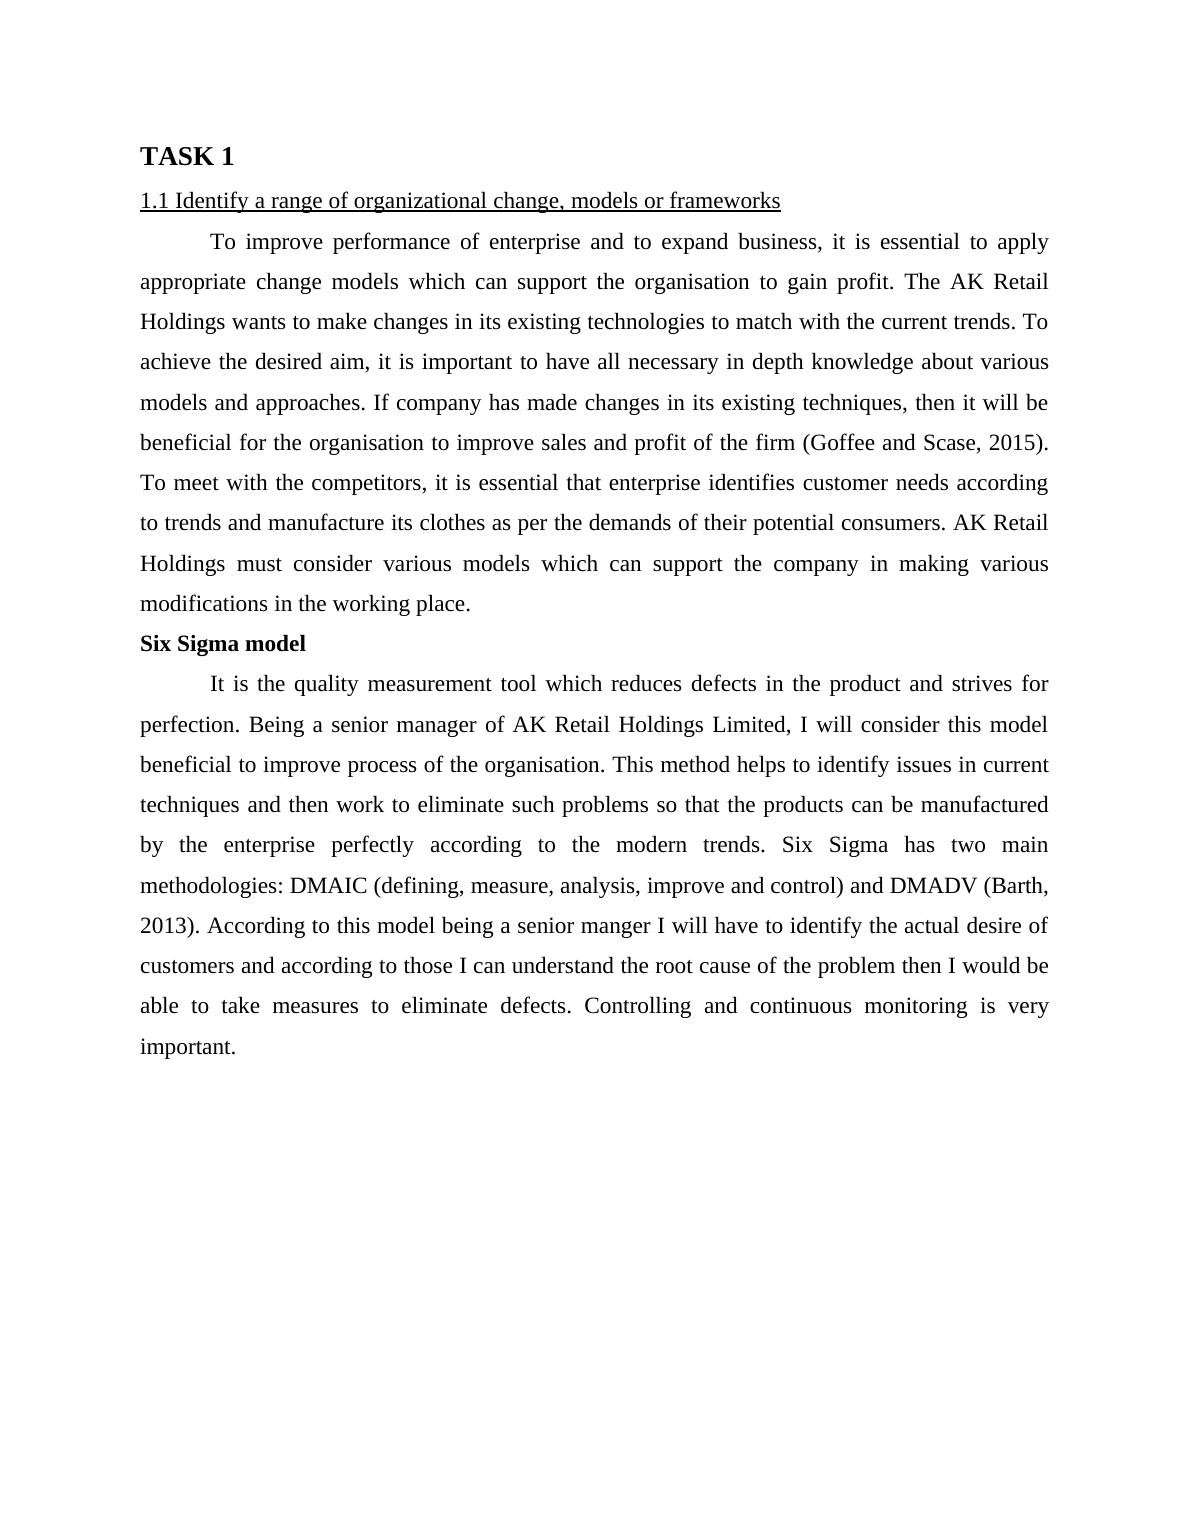 Report On AK Retail Holdings Limited - Change Management_4